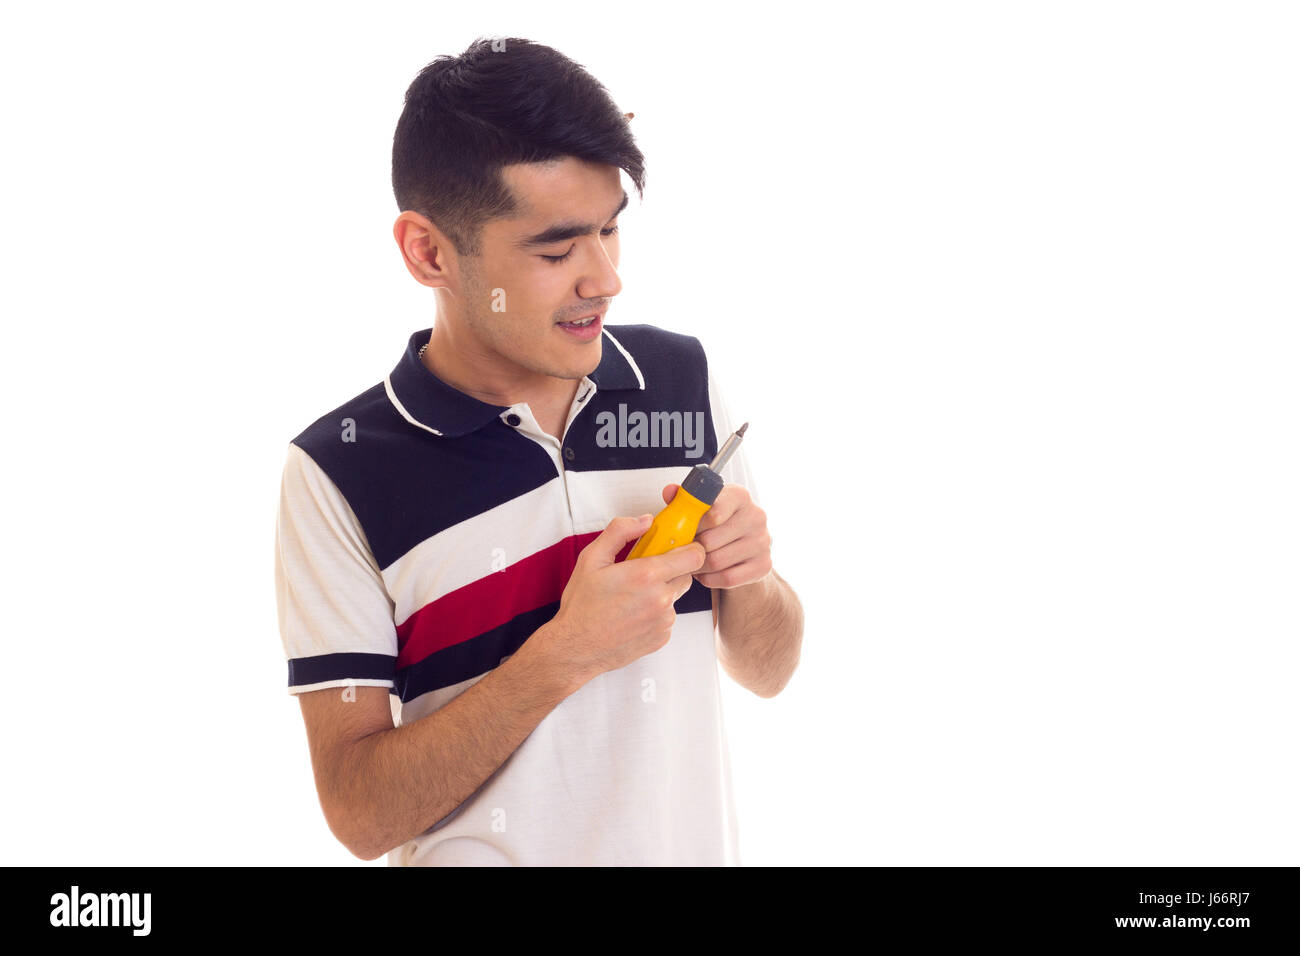 Young man holding a screwdriver Stock Photo